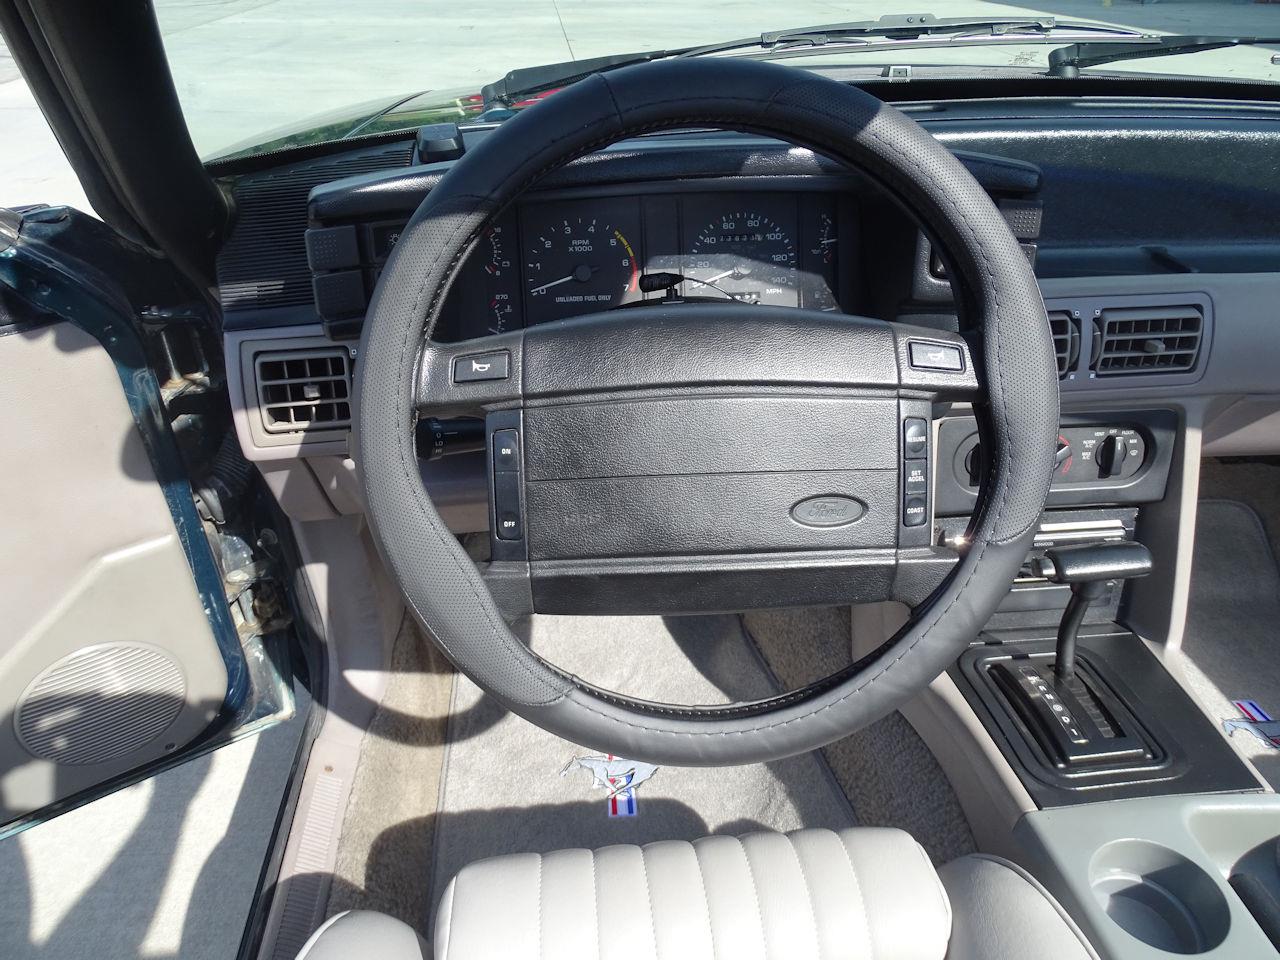 1991 Ford Mustang for sale in O'Fallon, IL – photo 72